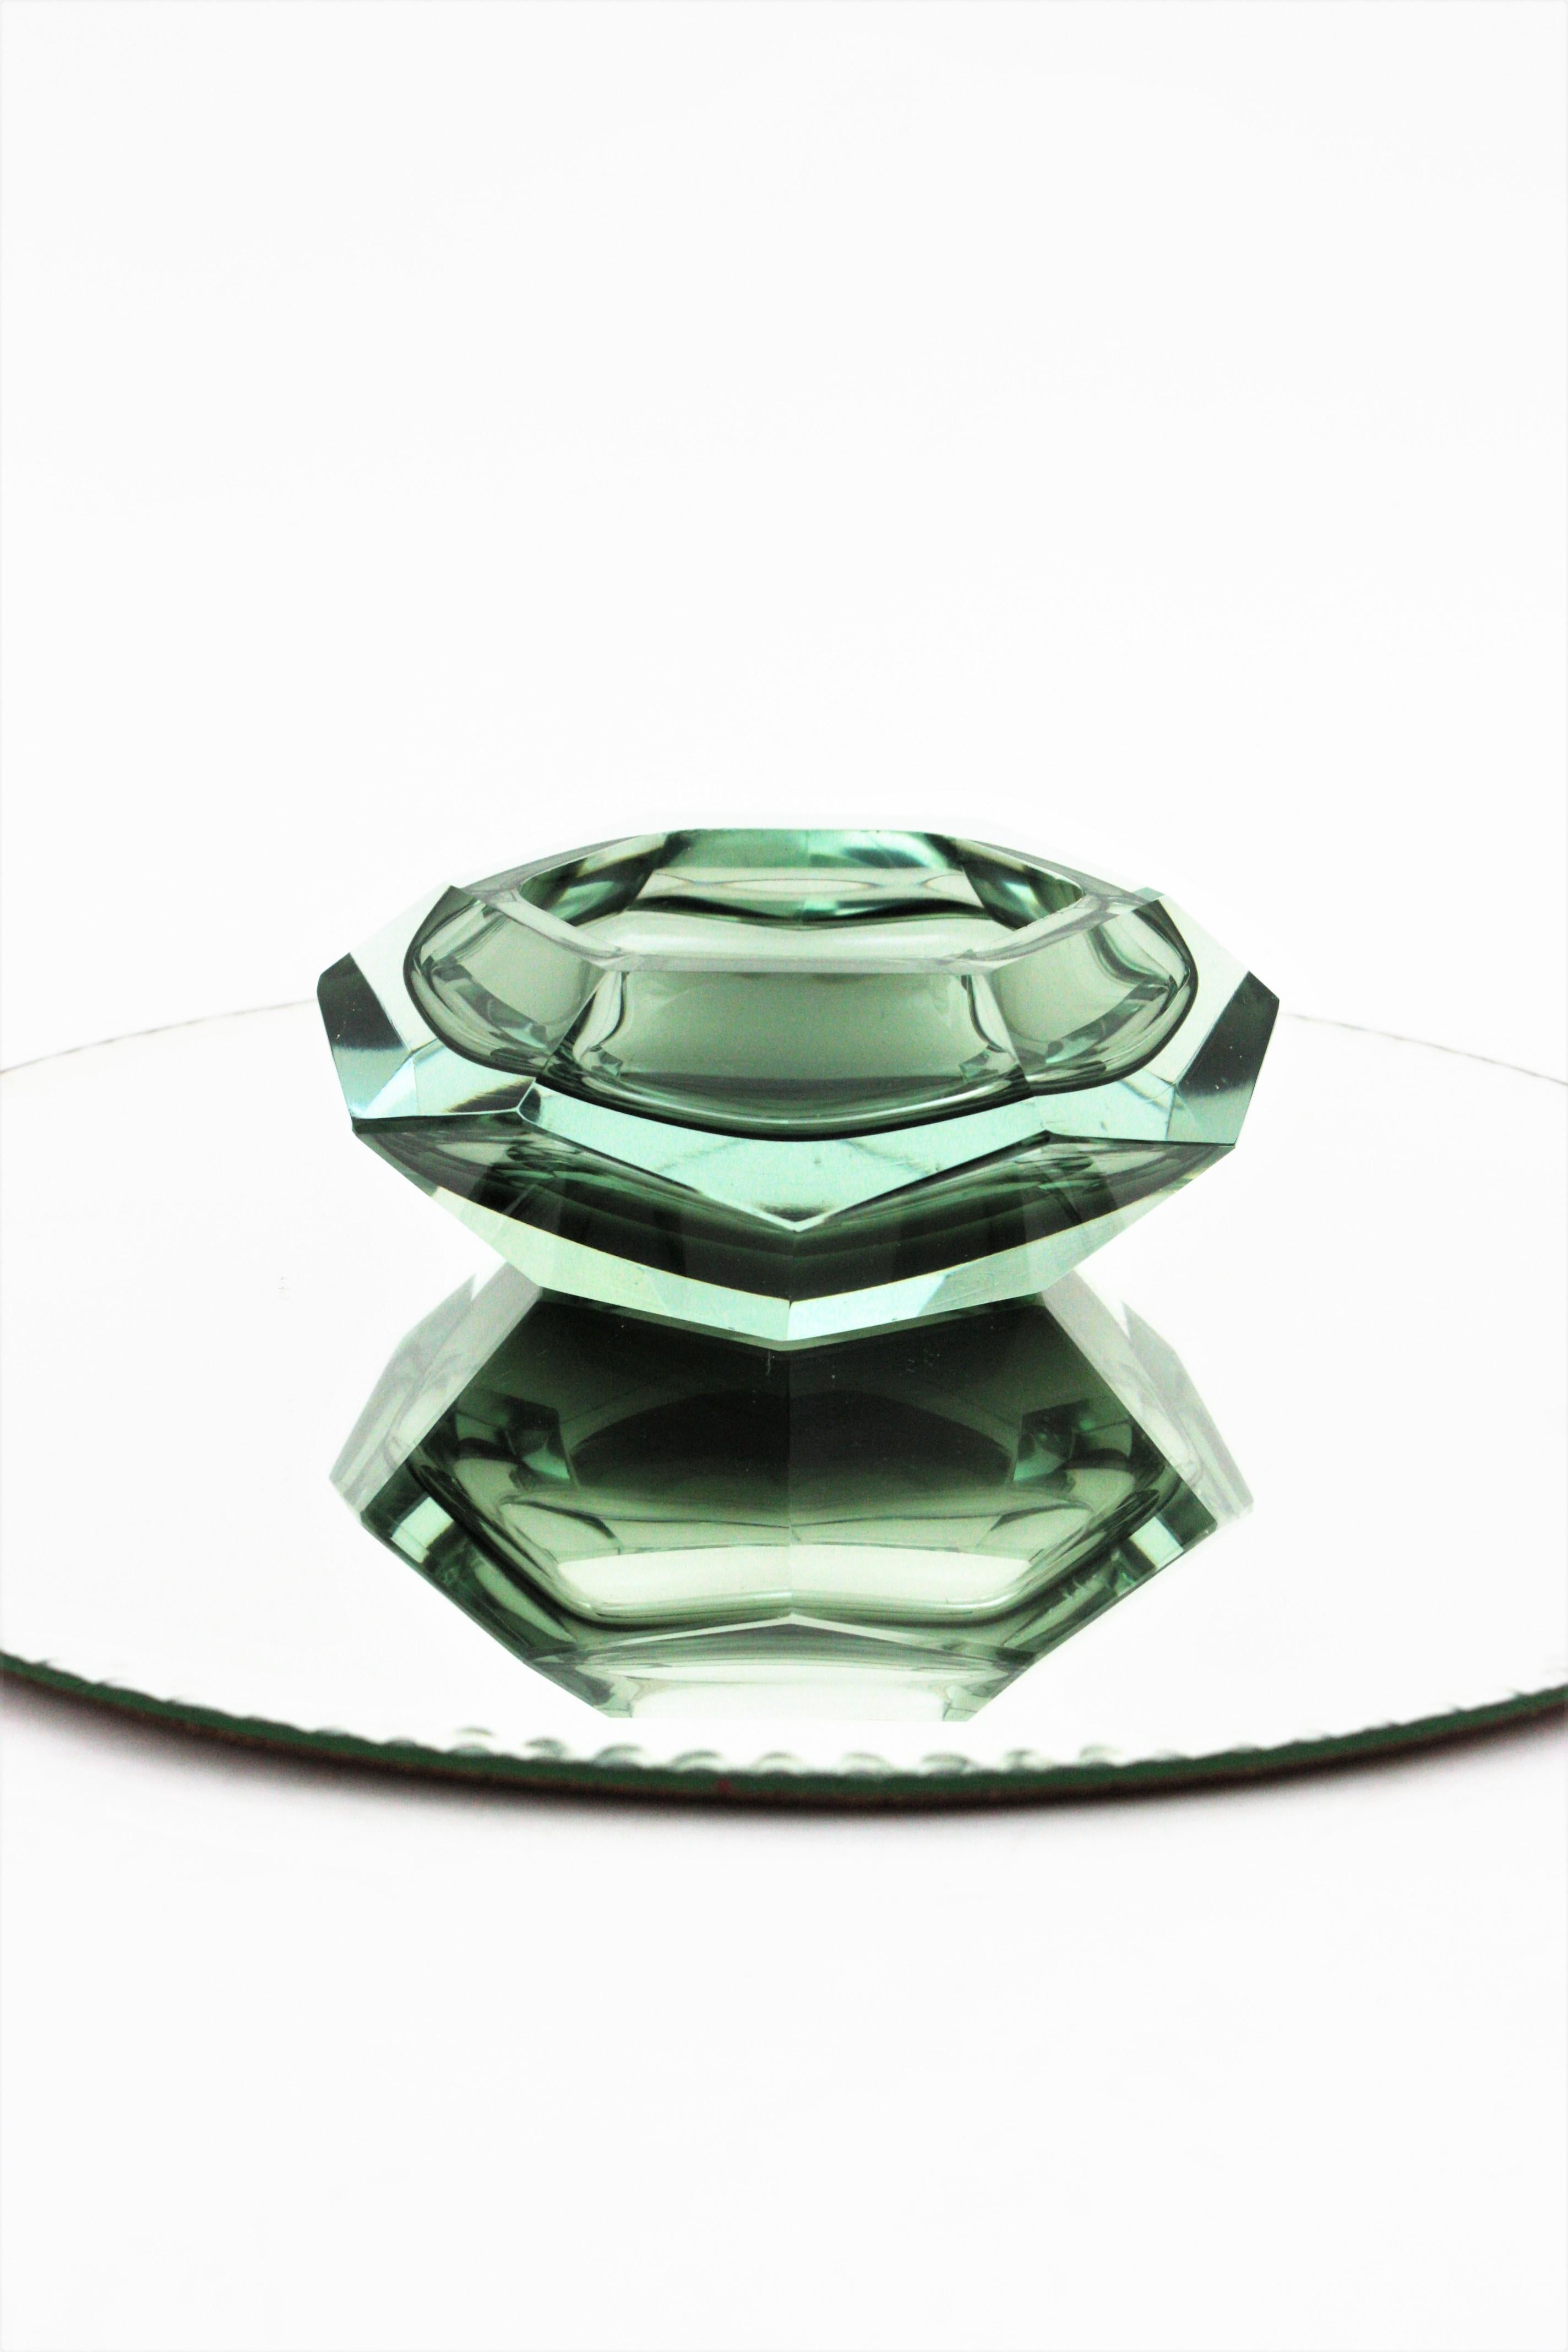 Flavio Poli Murano Sommerso Smoked Grey Faceted Bowl 4